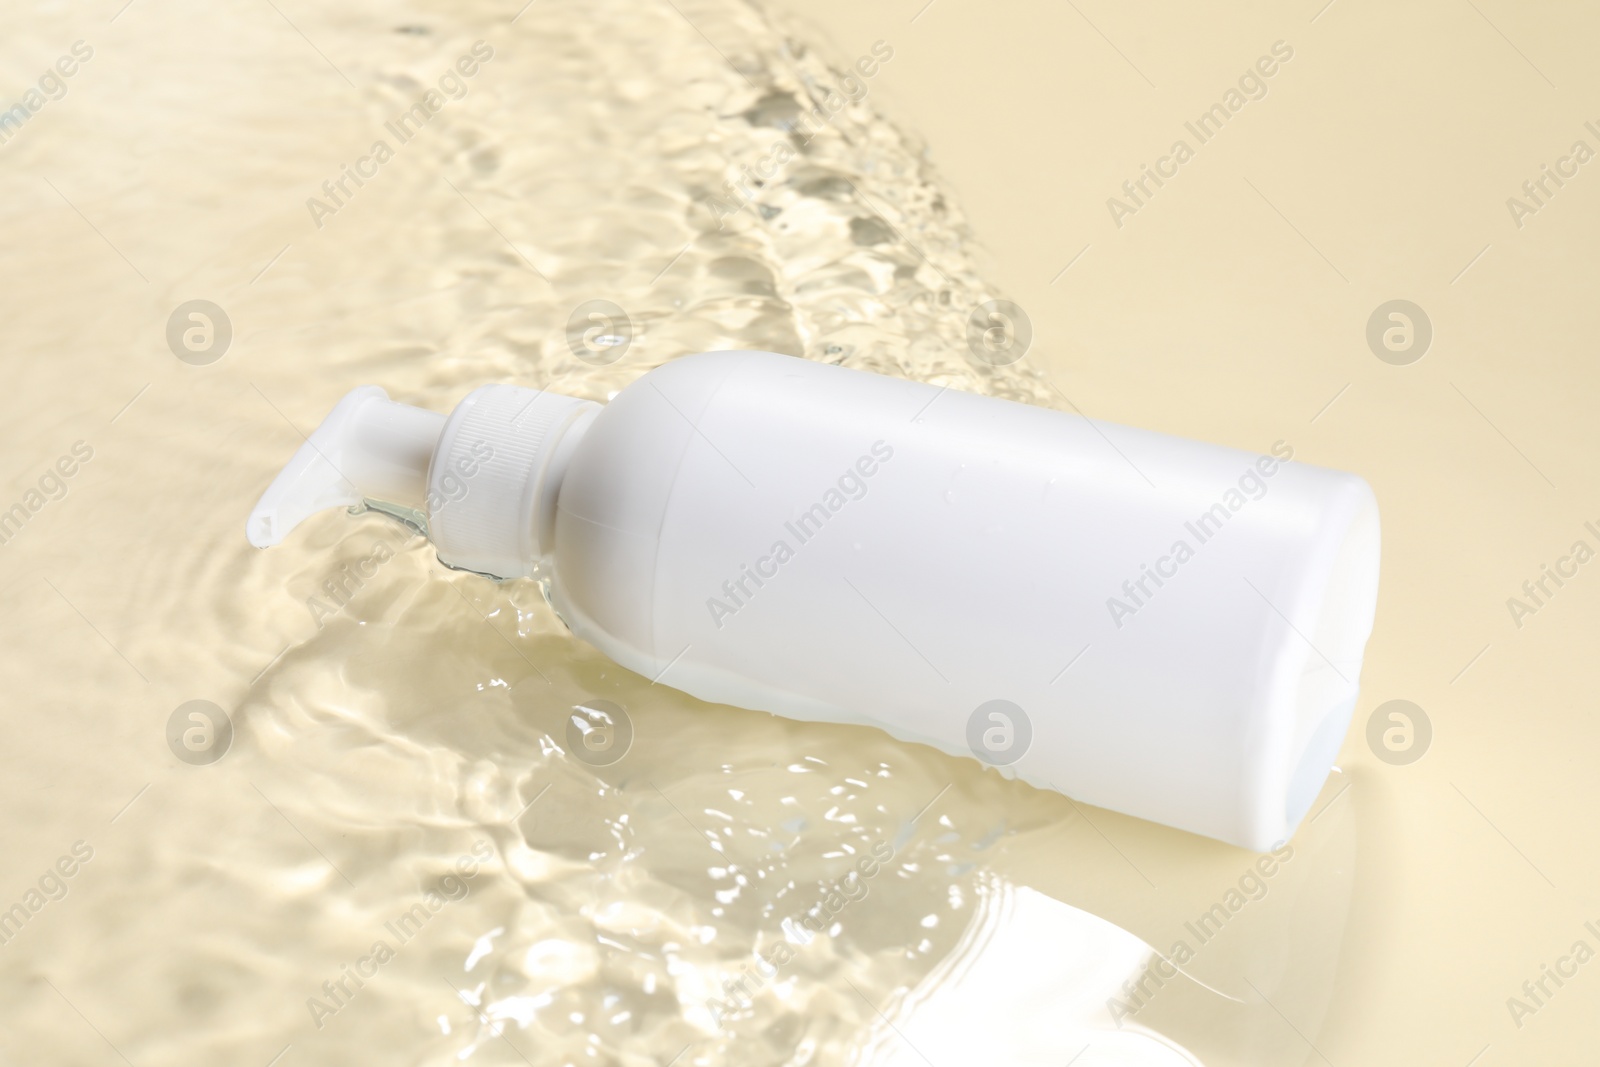 Photo of Bottle of face cleansing product in water against beige background